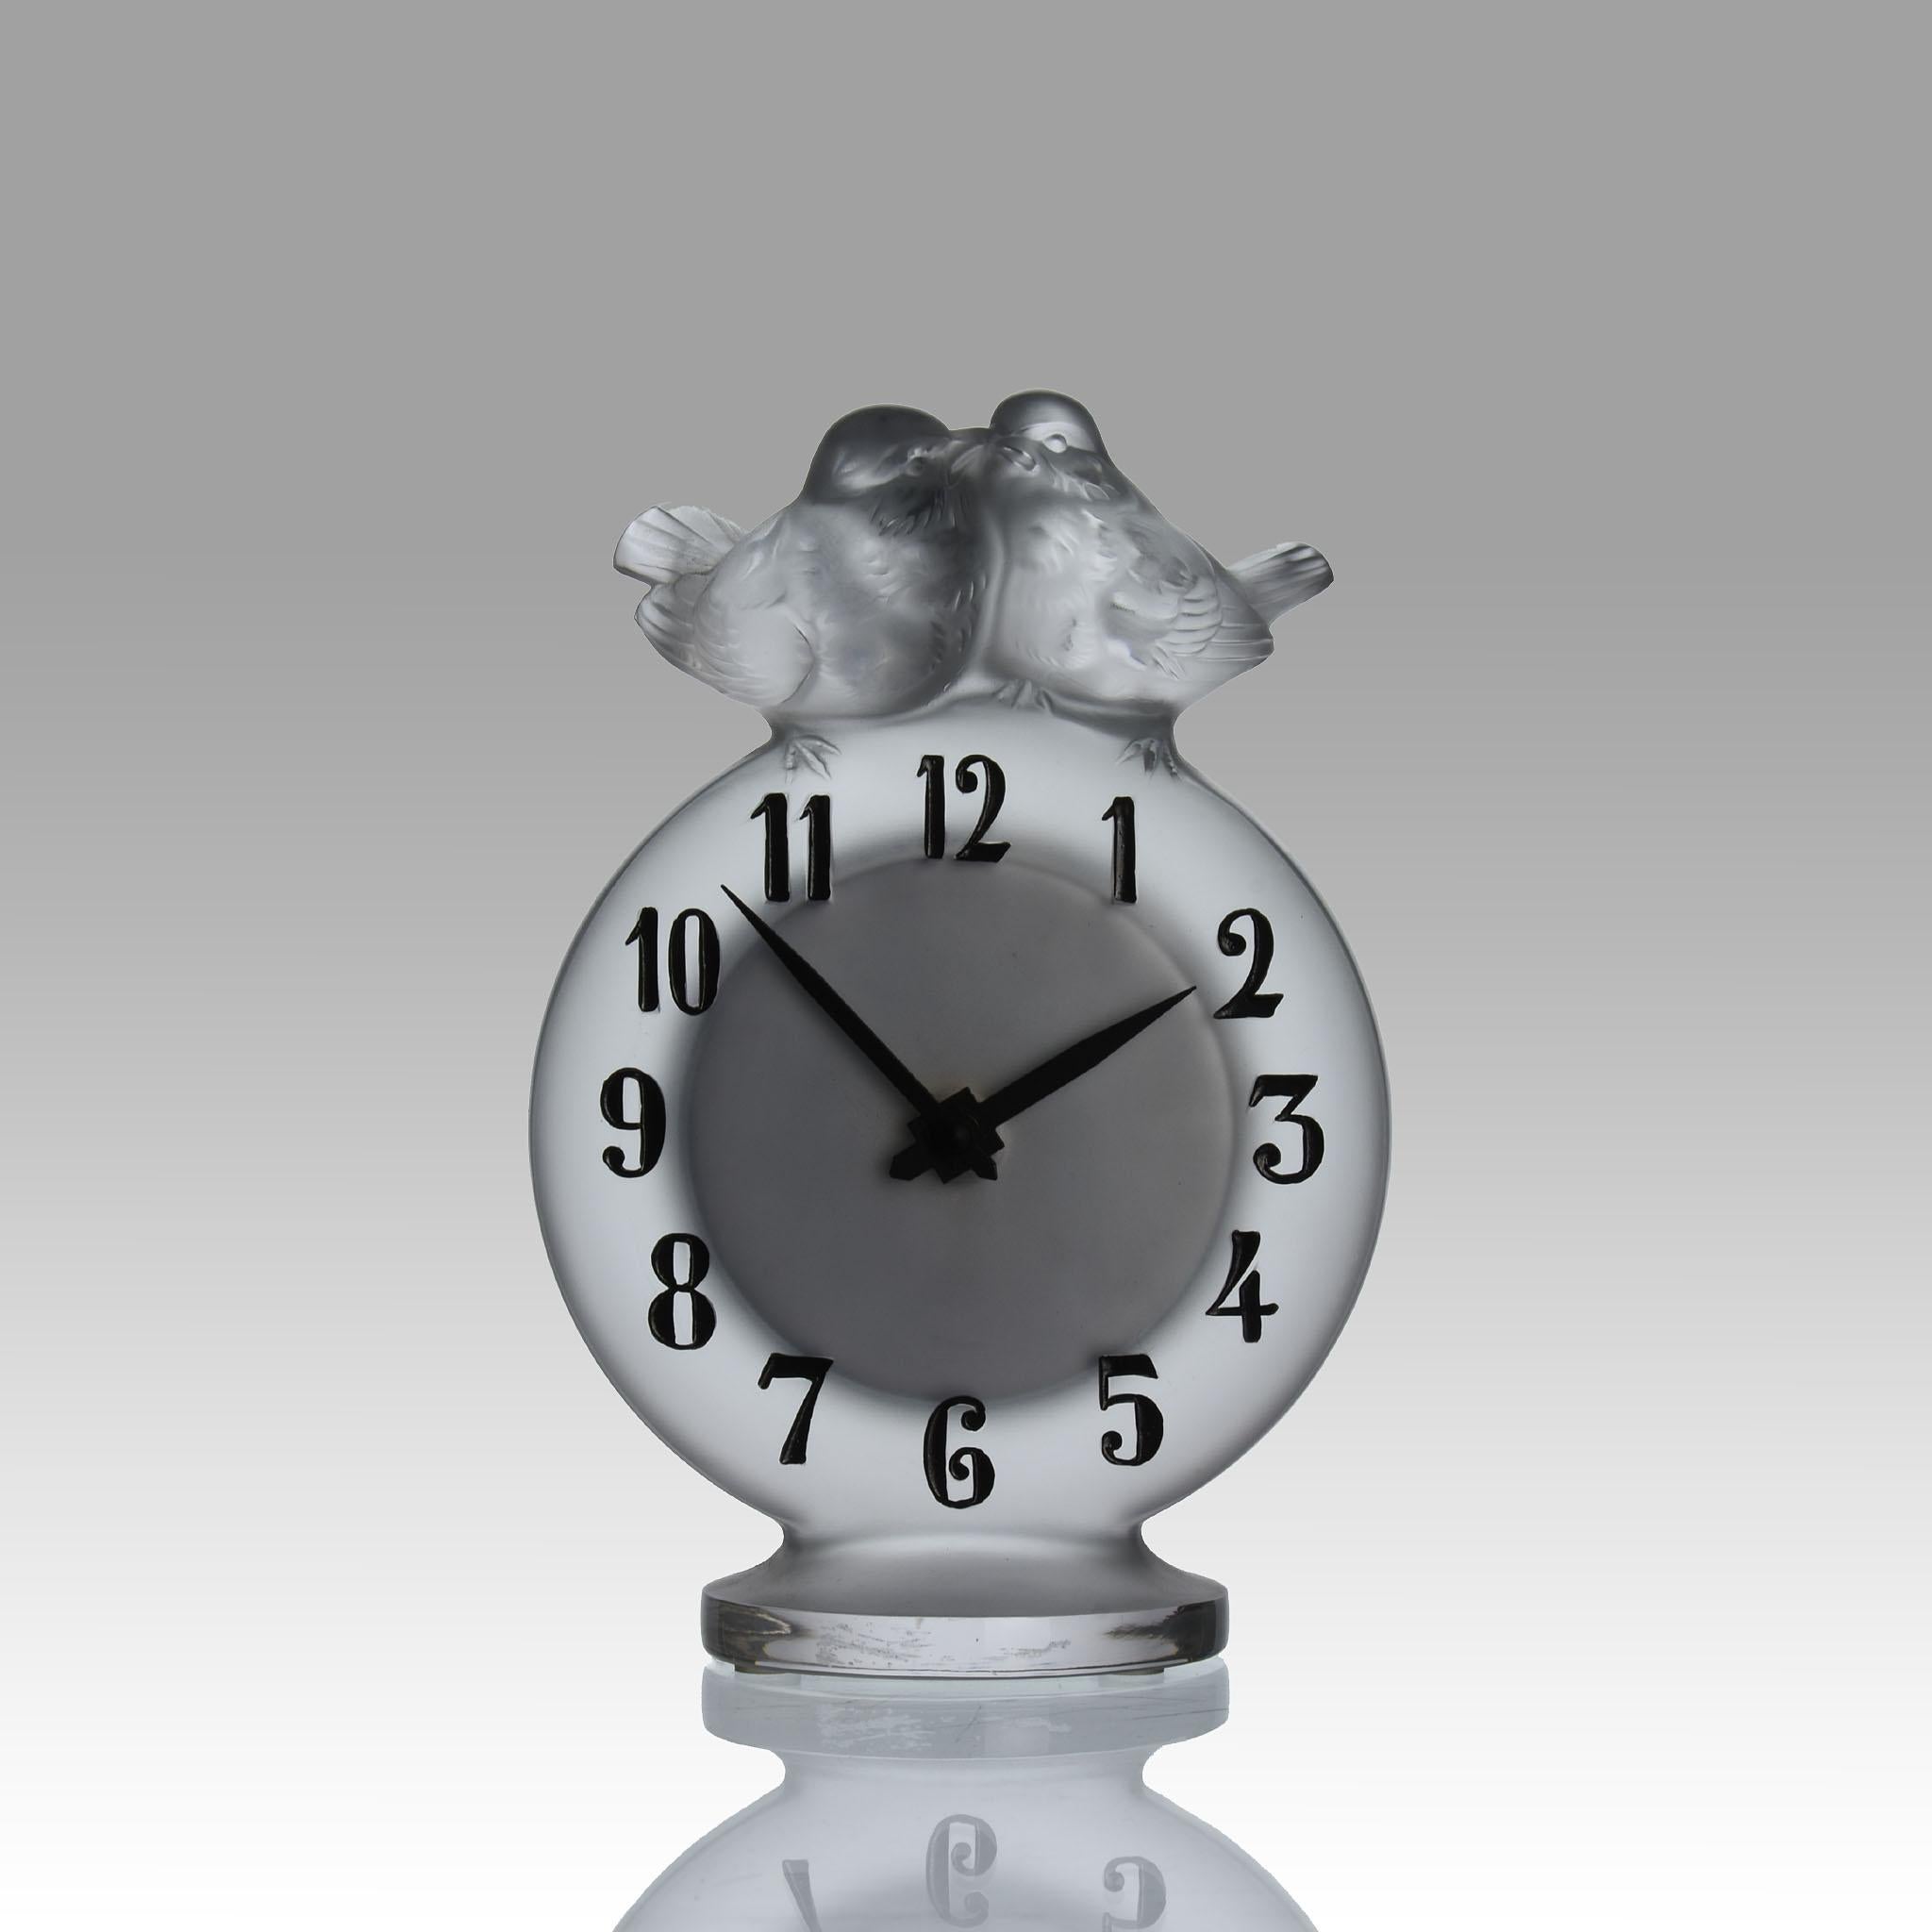 Delightful French frosted glass clock surmounted with two perched lovebirds, the dial with black enamel numerals, signed Lalique France

ADDITIONAL INFORMATION
Height: 15 cm
Width: 10 cm

Condition: Excellent Condition

Circa: